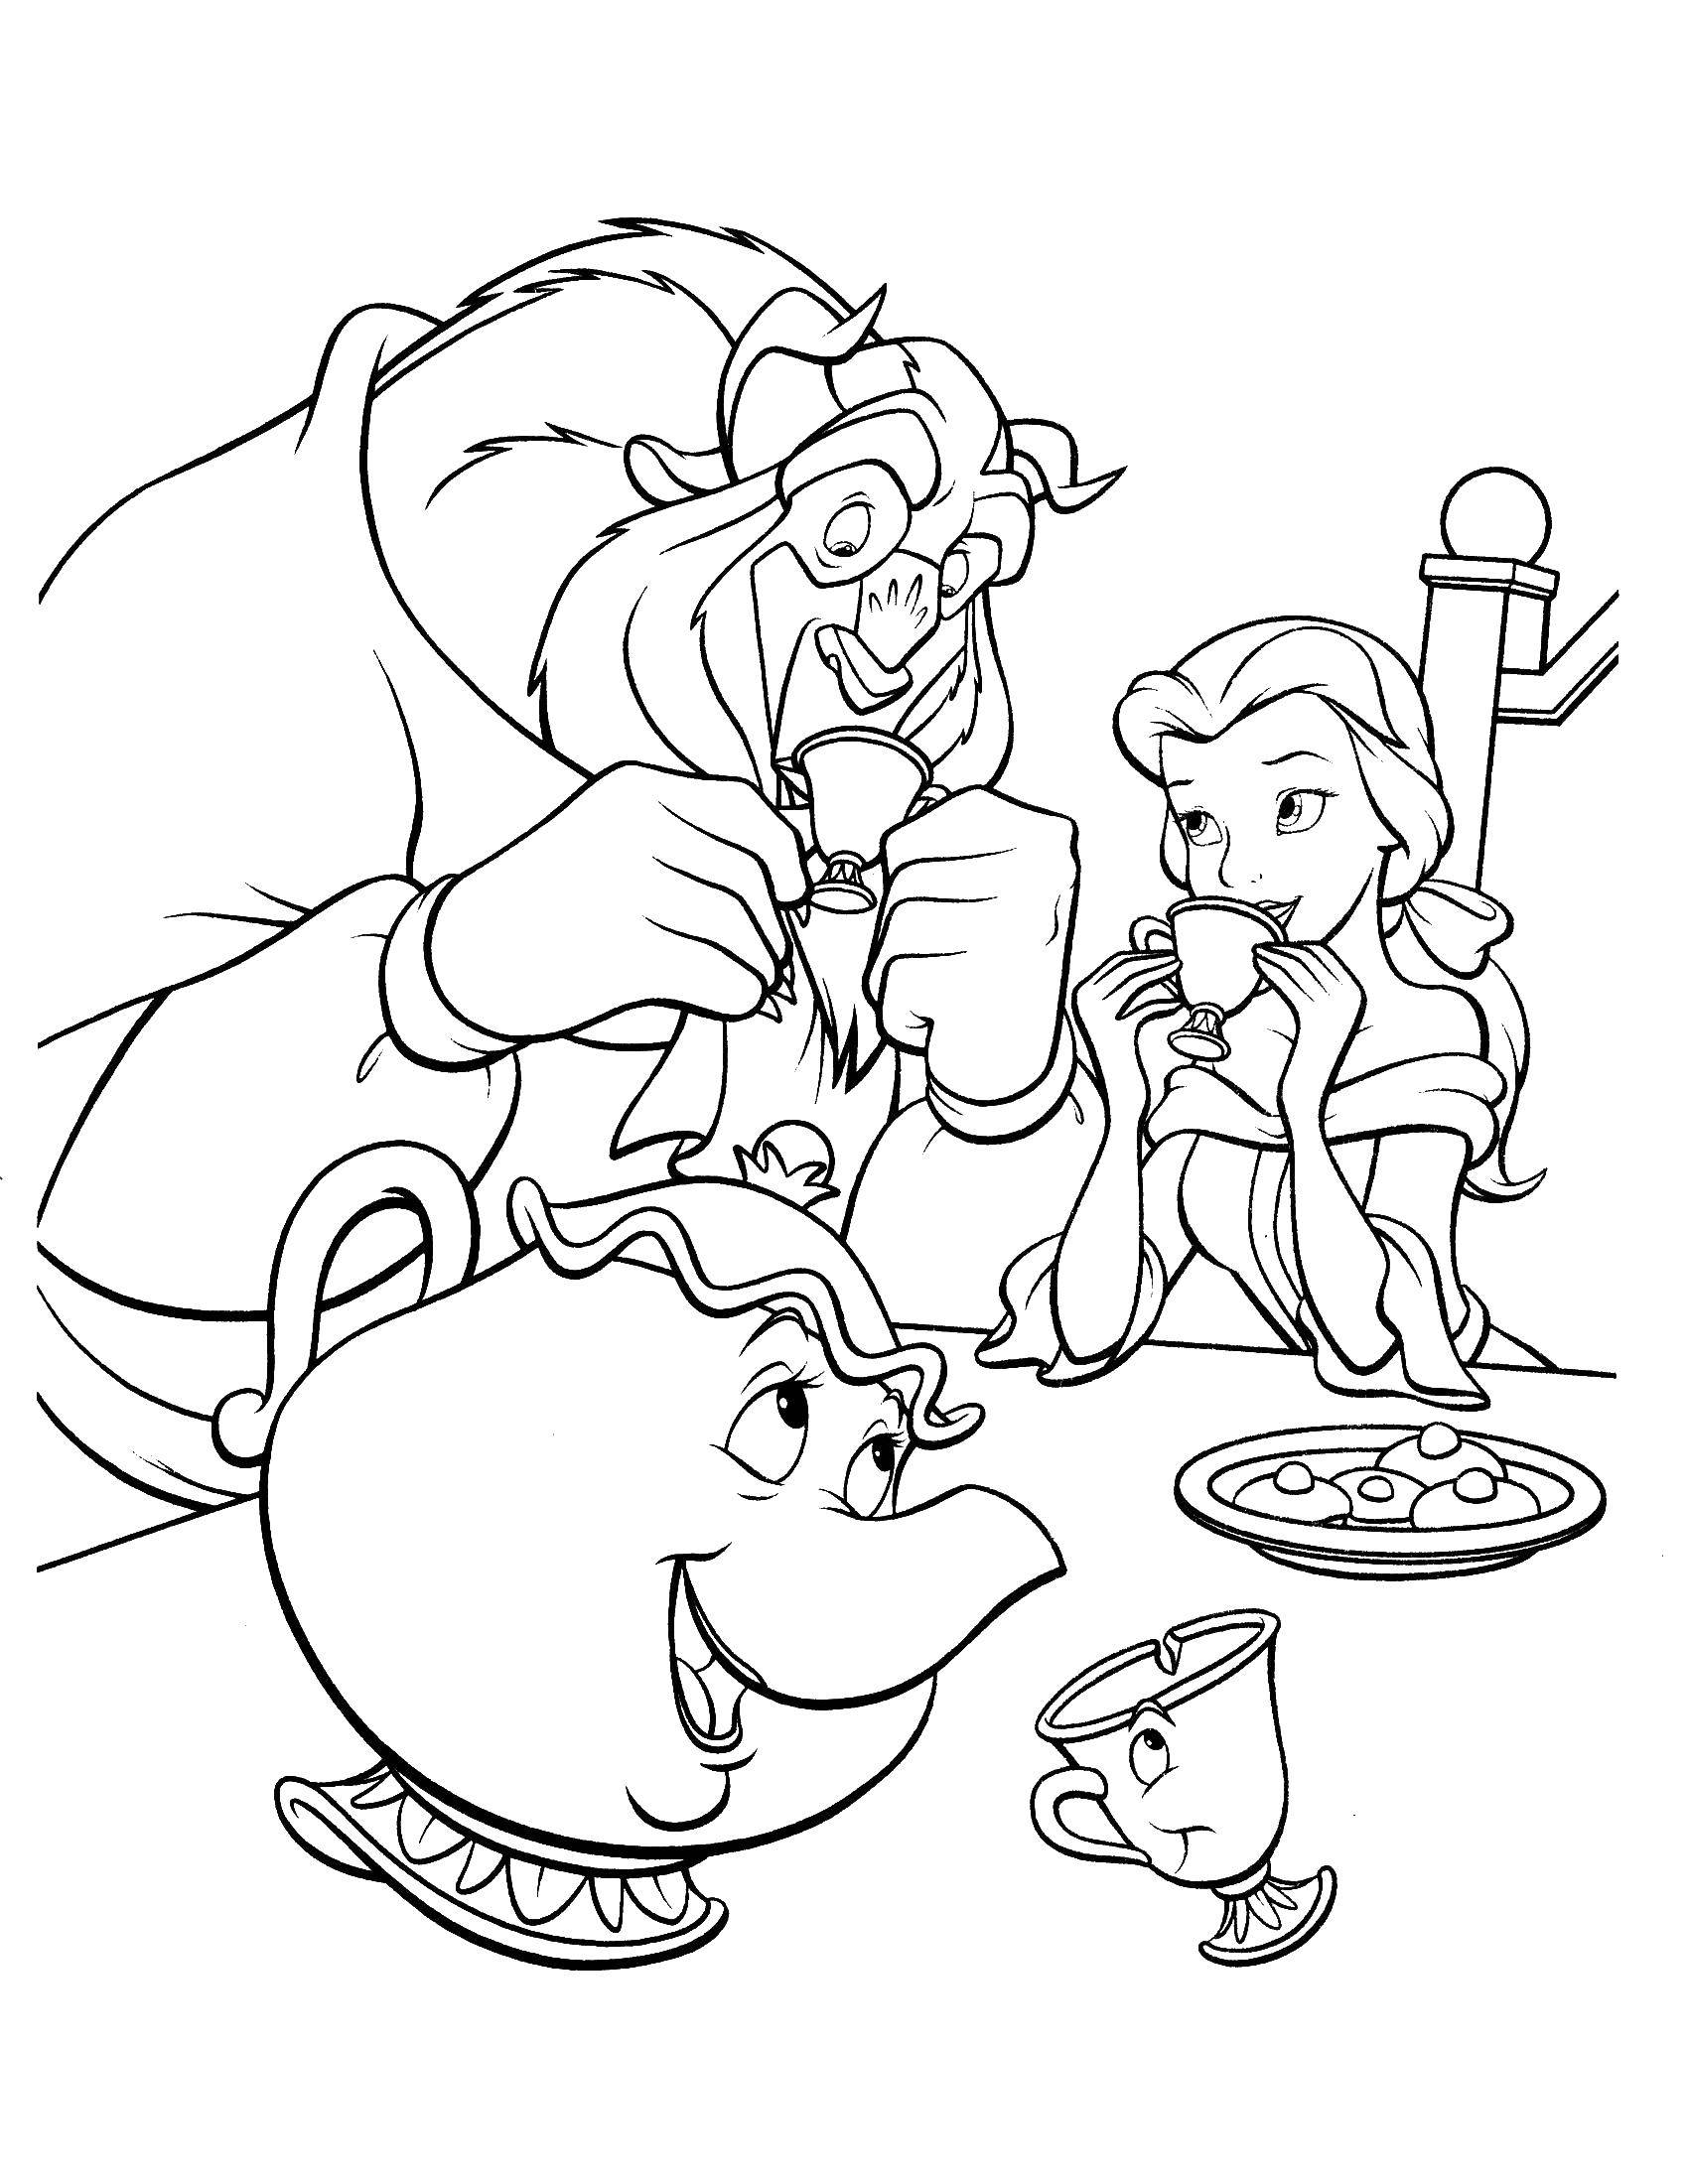 Coloring Beauty Belle and the beast having tea. Category beauty and the beast. Tags:  beautiful , monster.